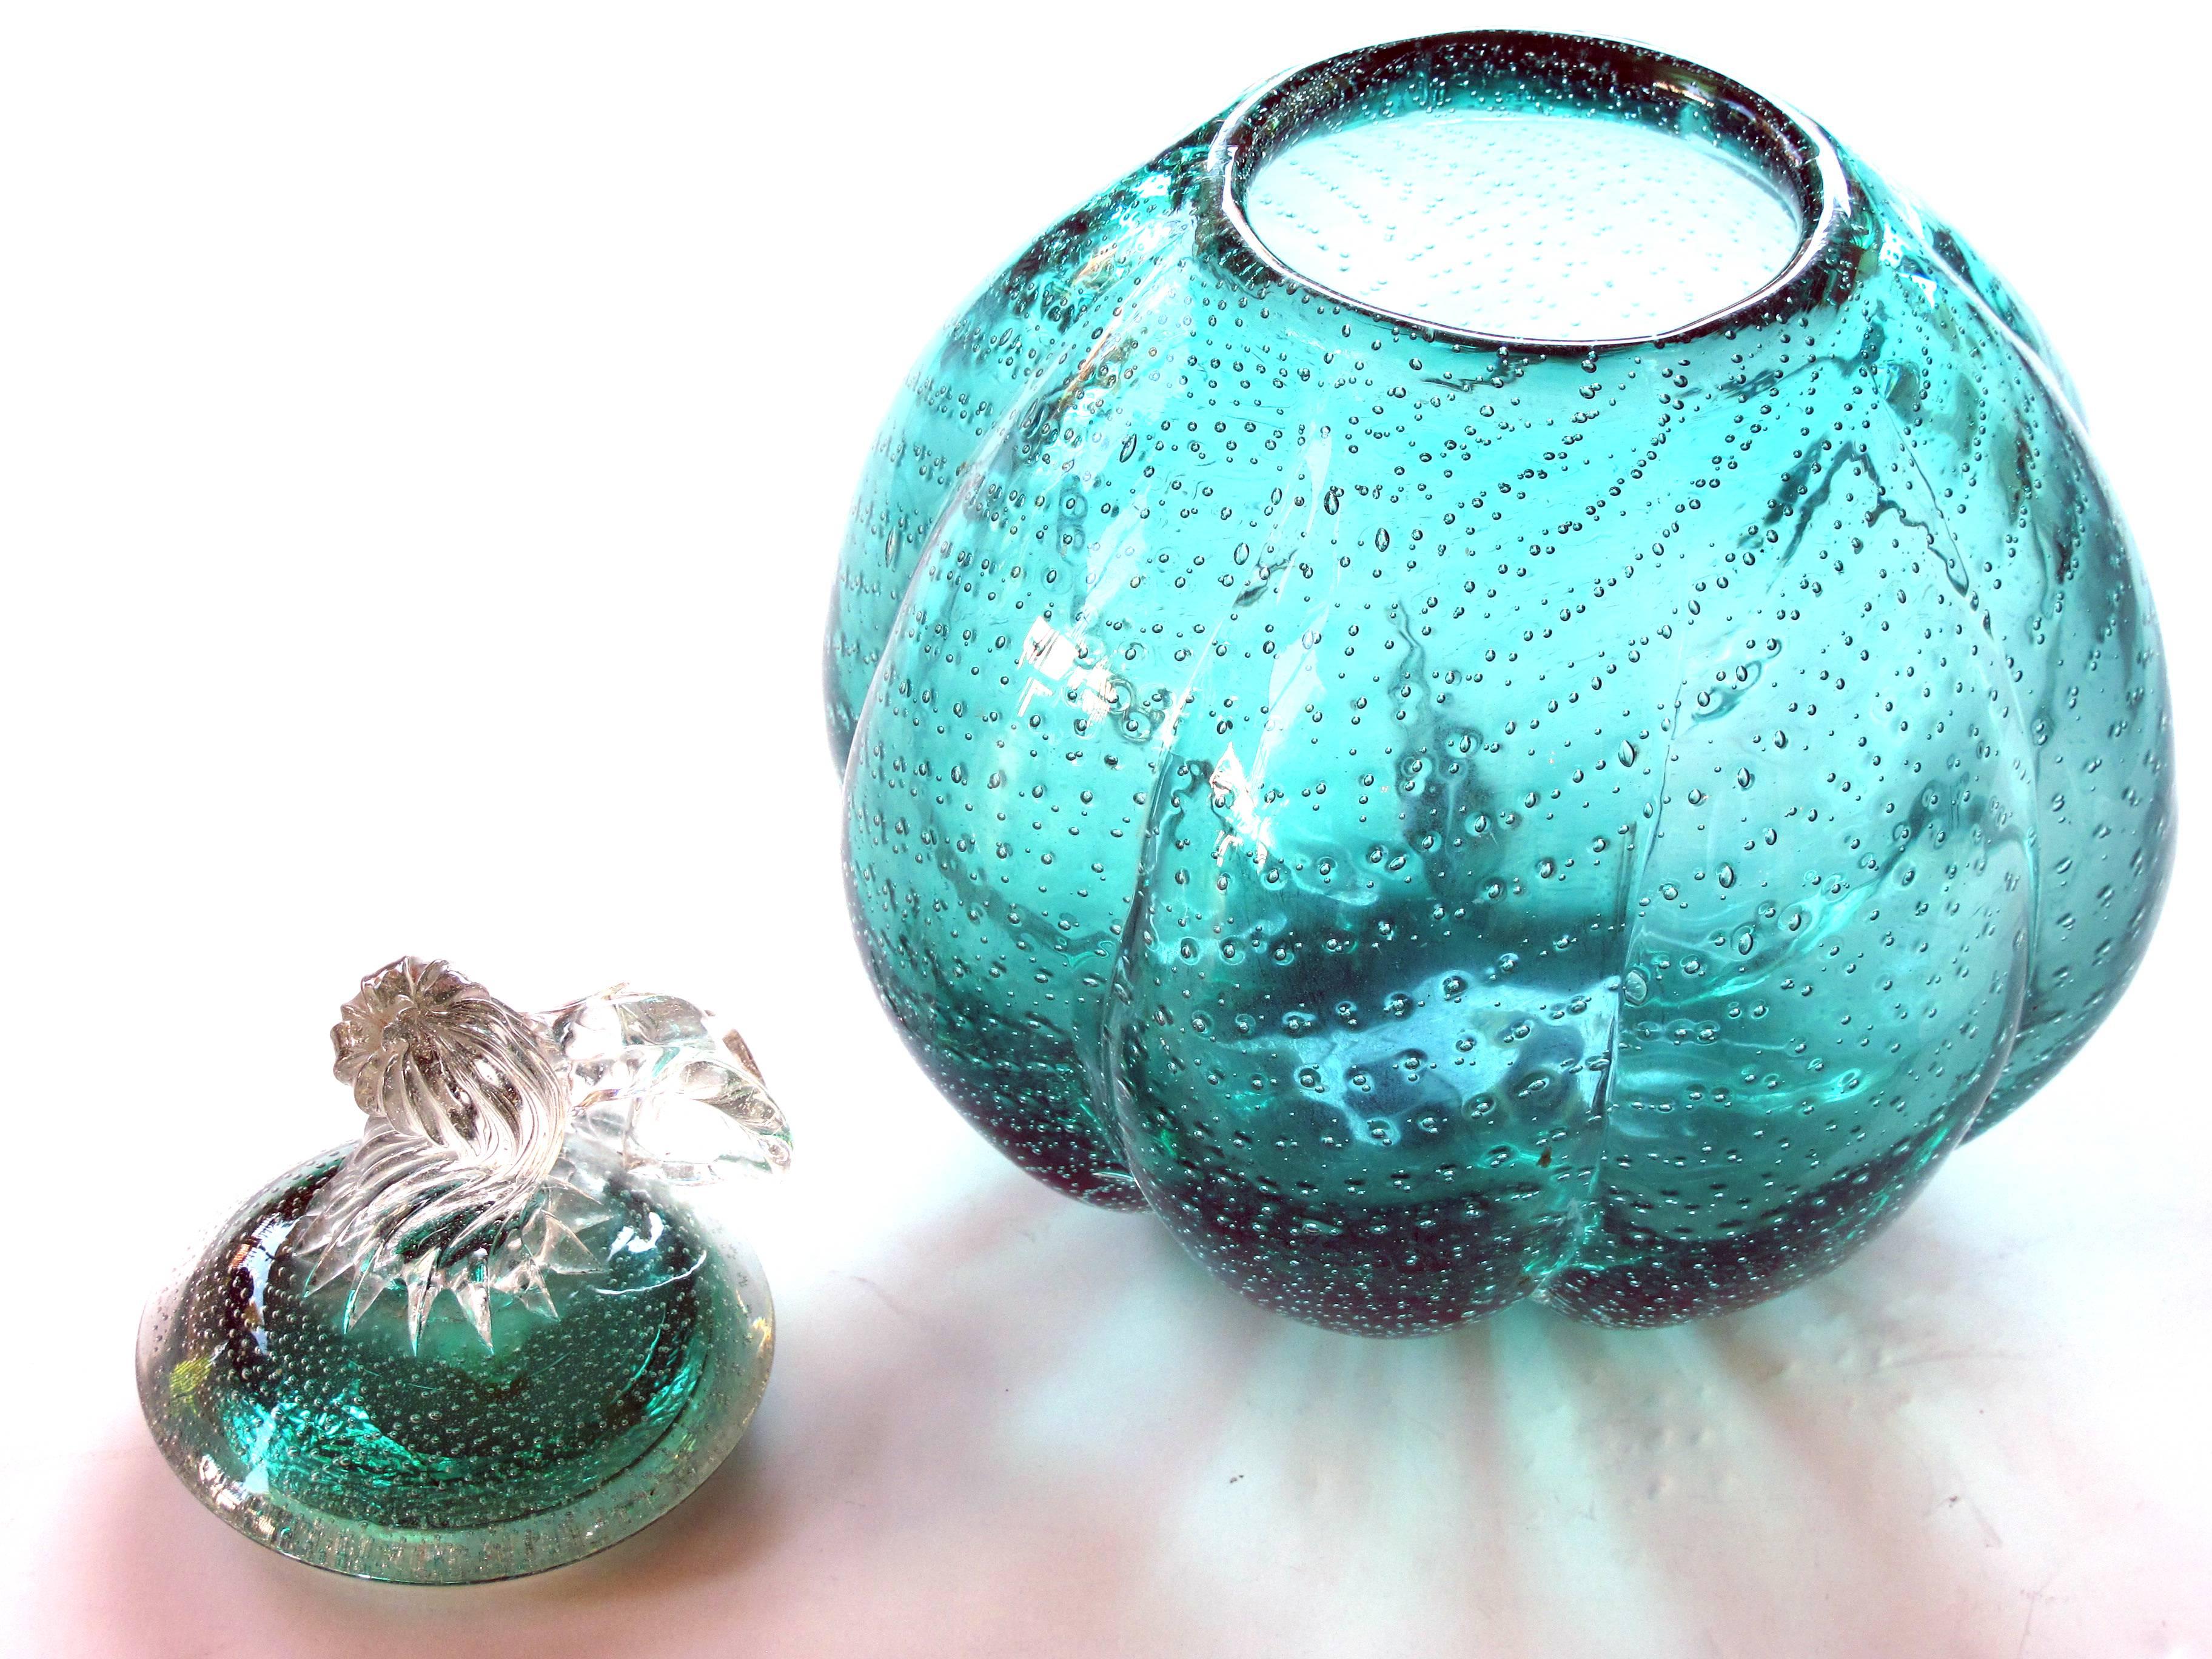 Italian Whimsical Murano 1950s Teal Art Glass Gourd with Lid